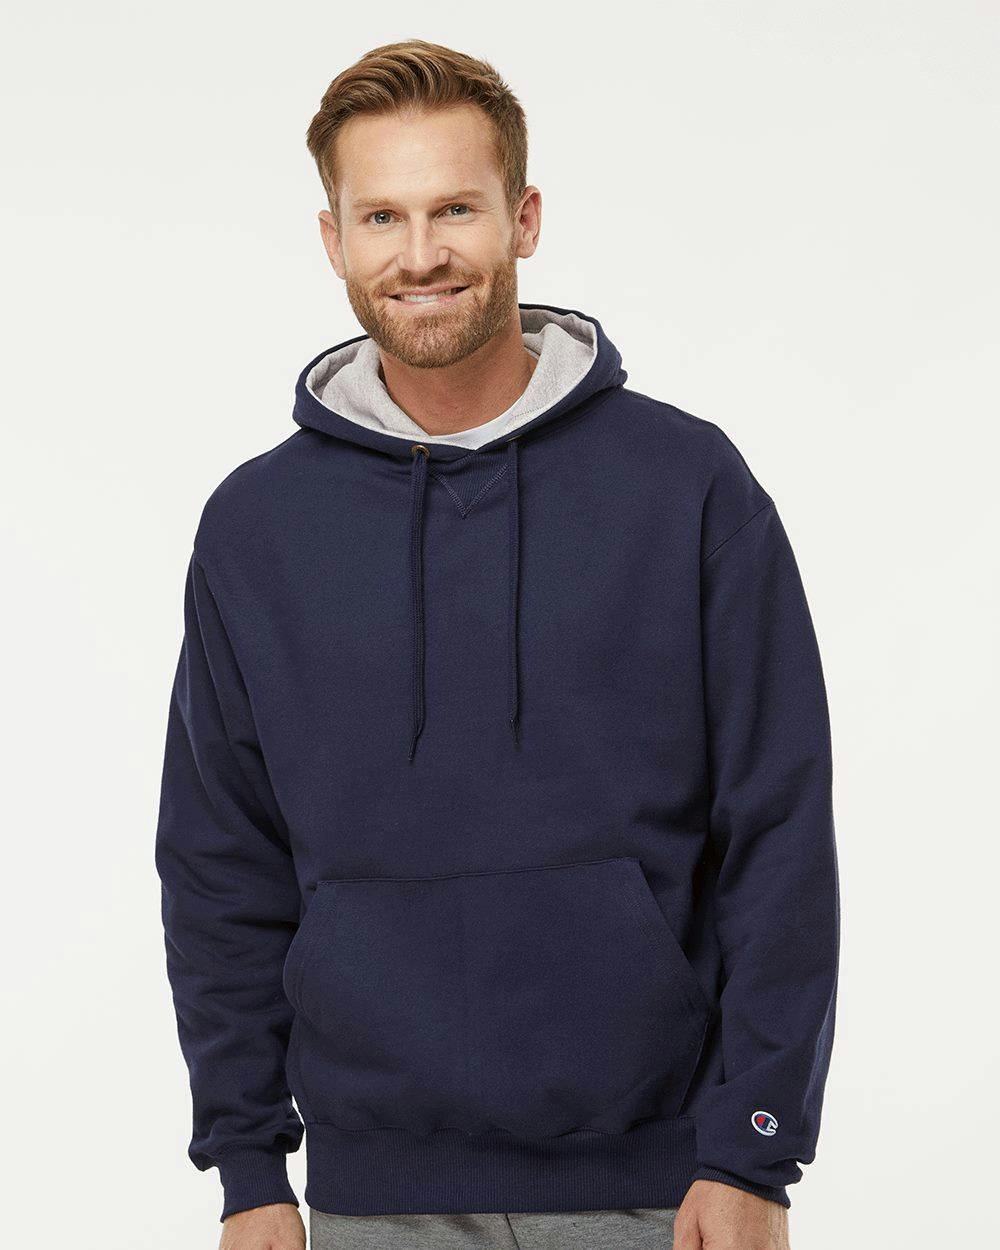 Image for Cotton Max Hooded Sweatshirt - S171